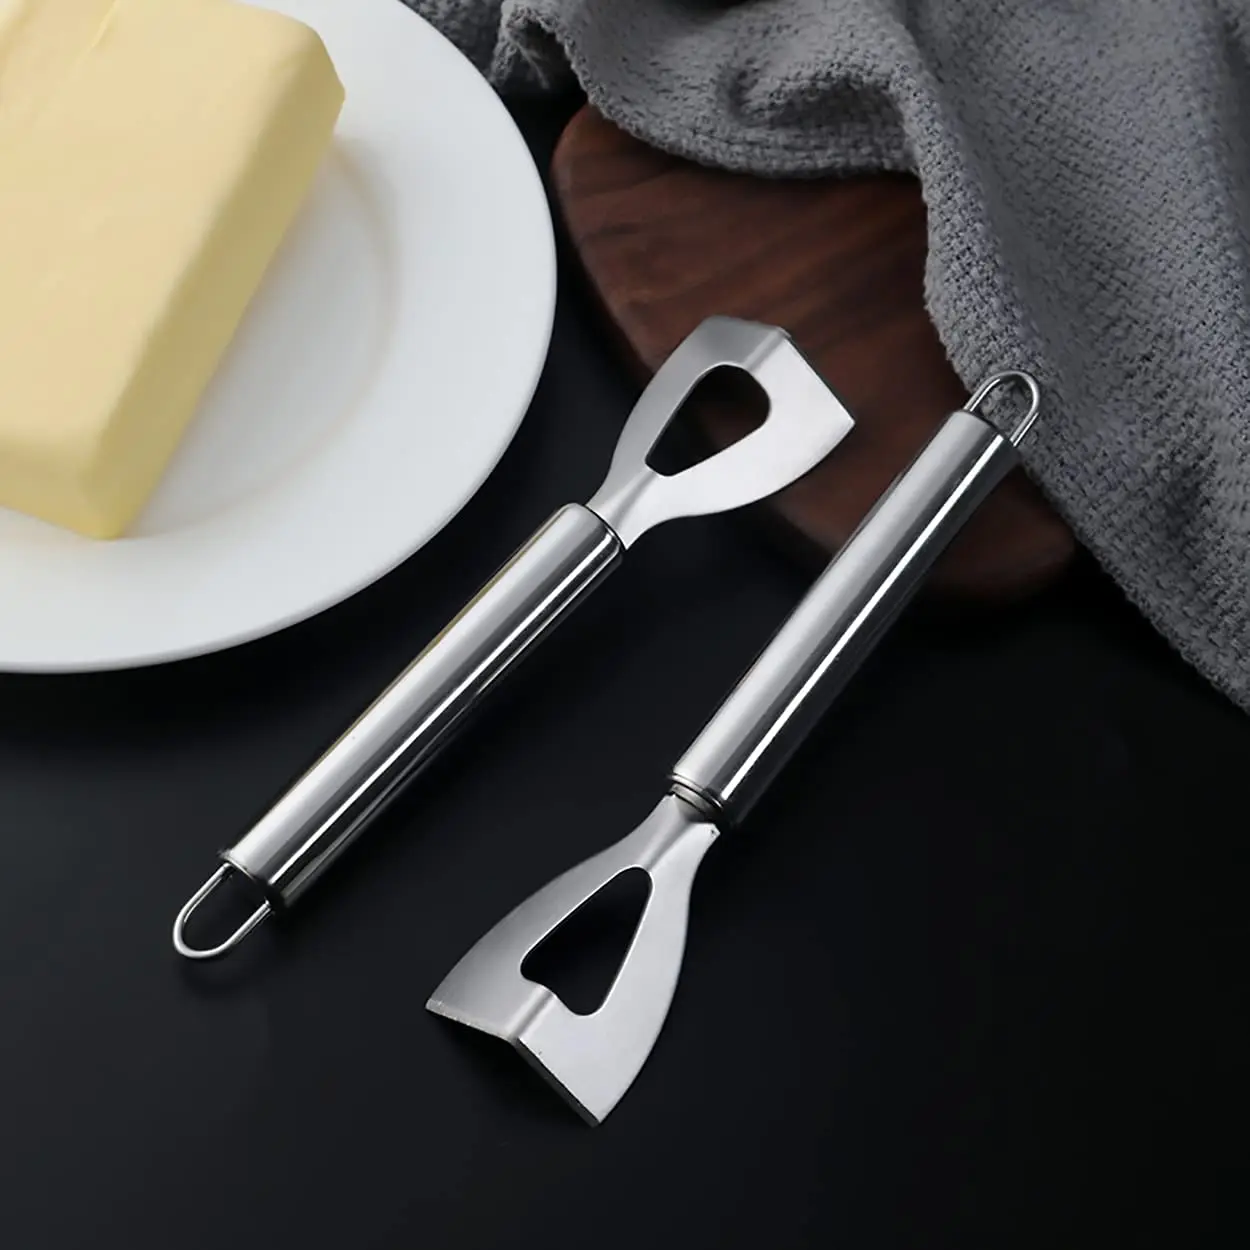 Stainless Steel Butter Knife Easy Use Non-Stick Butter Cutter Cheese Slicer with Hanging Hook